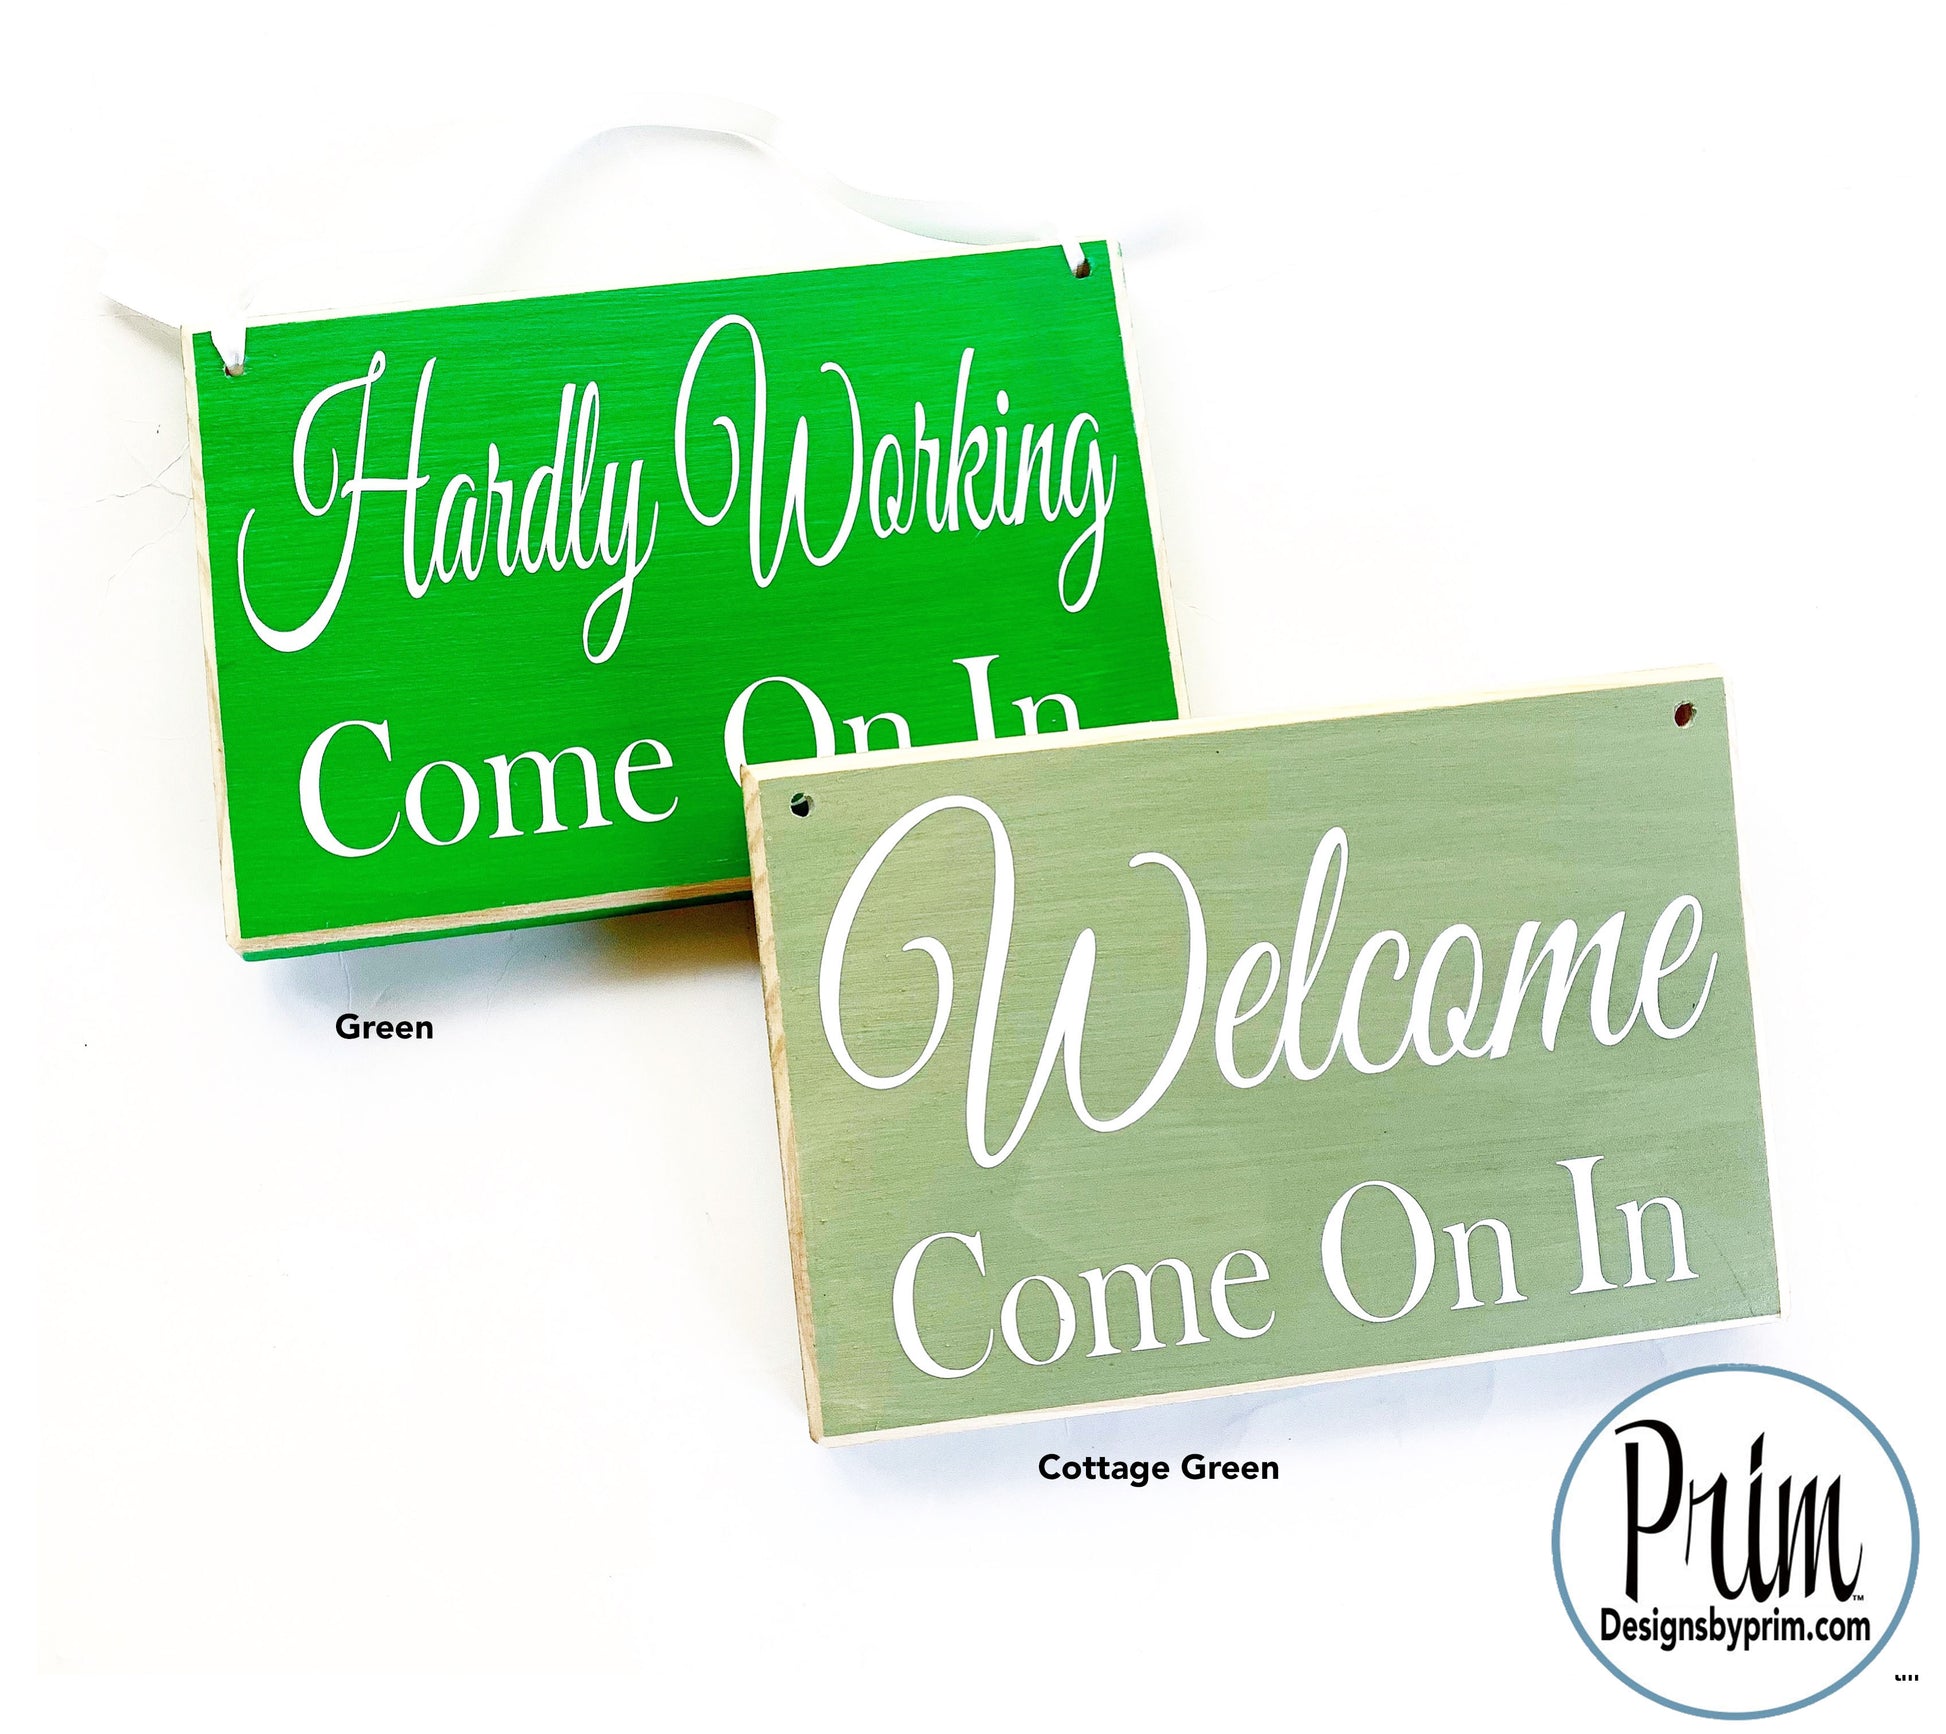 Designs by Prim 8x6 Welcome Please Come On In Custom Wood Sign | Welcome Front Door Office Greetings Family Business Open Closed Front Door Plaque